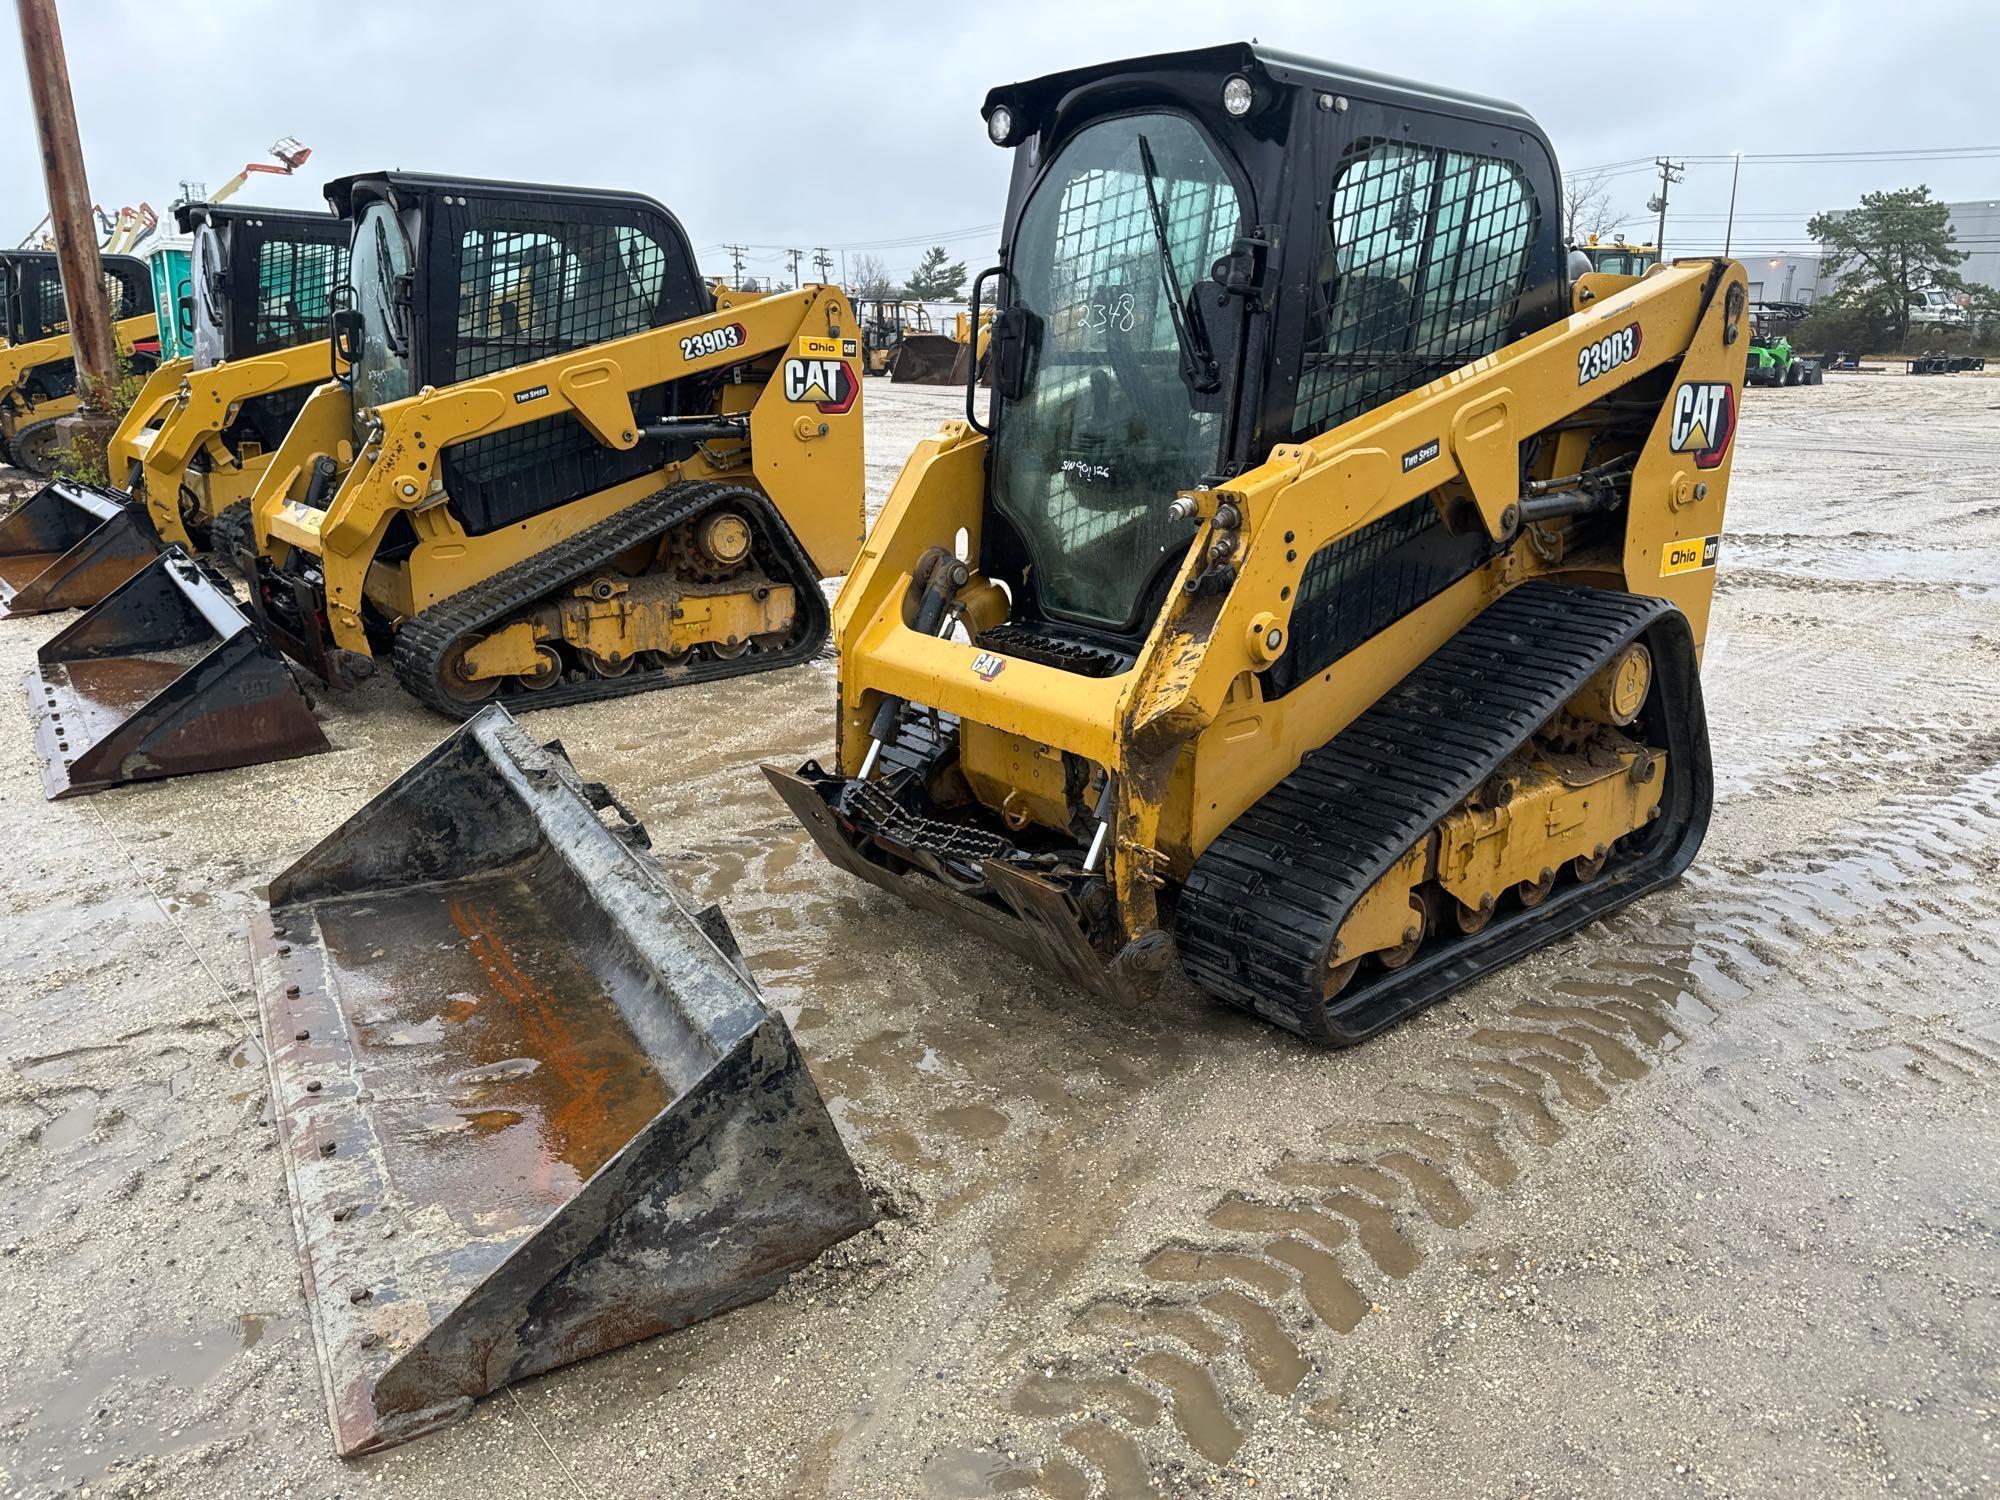 2021 CAT 239D RUBBER TRACKED SKID STEER SN:HC901126 powered by Cat diesel engine, equipped with